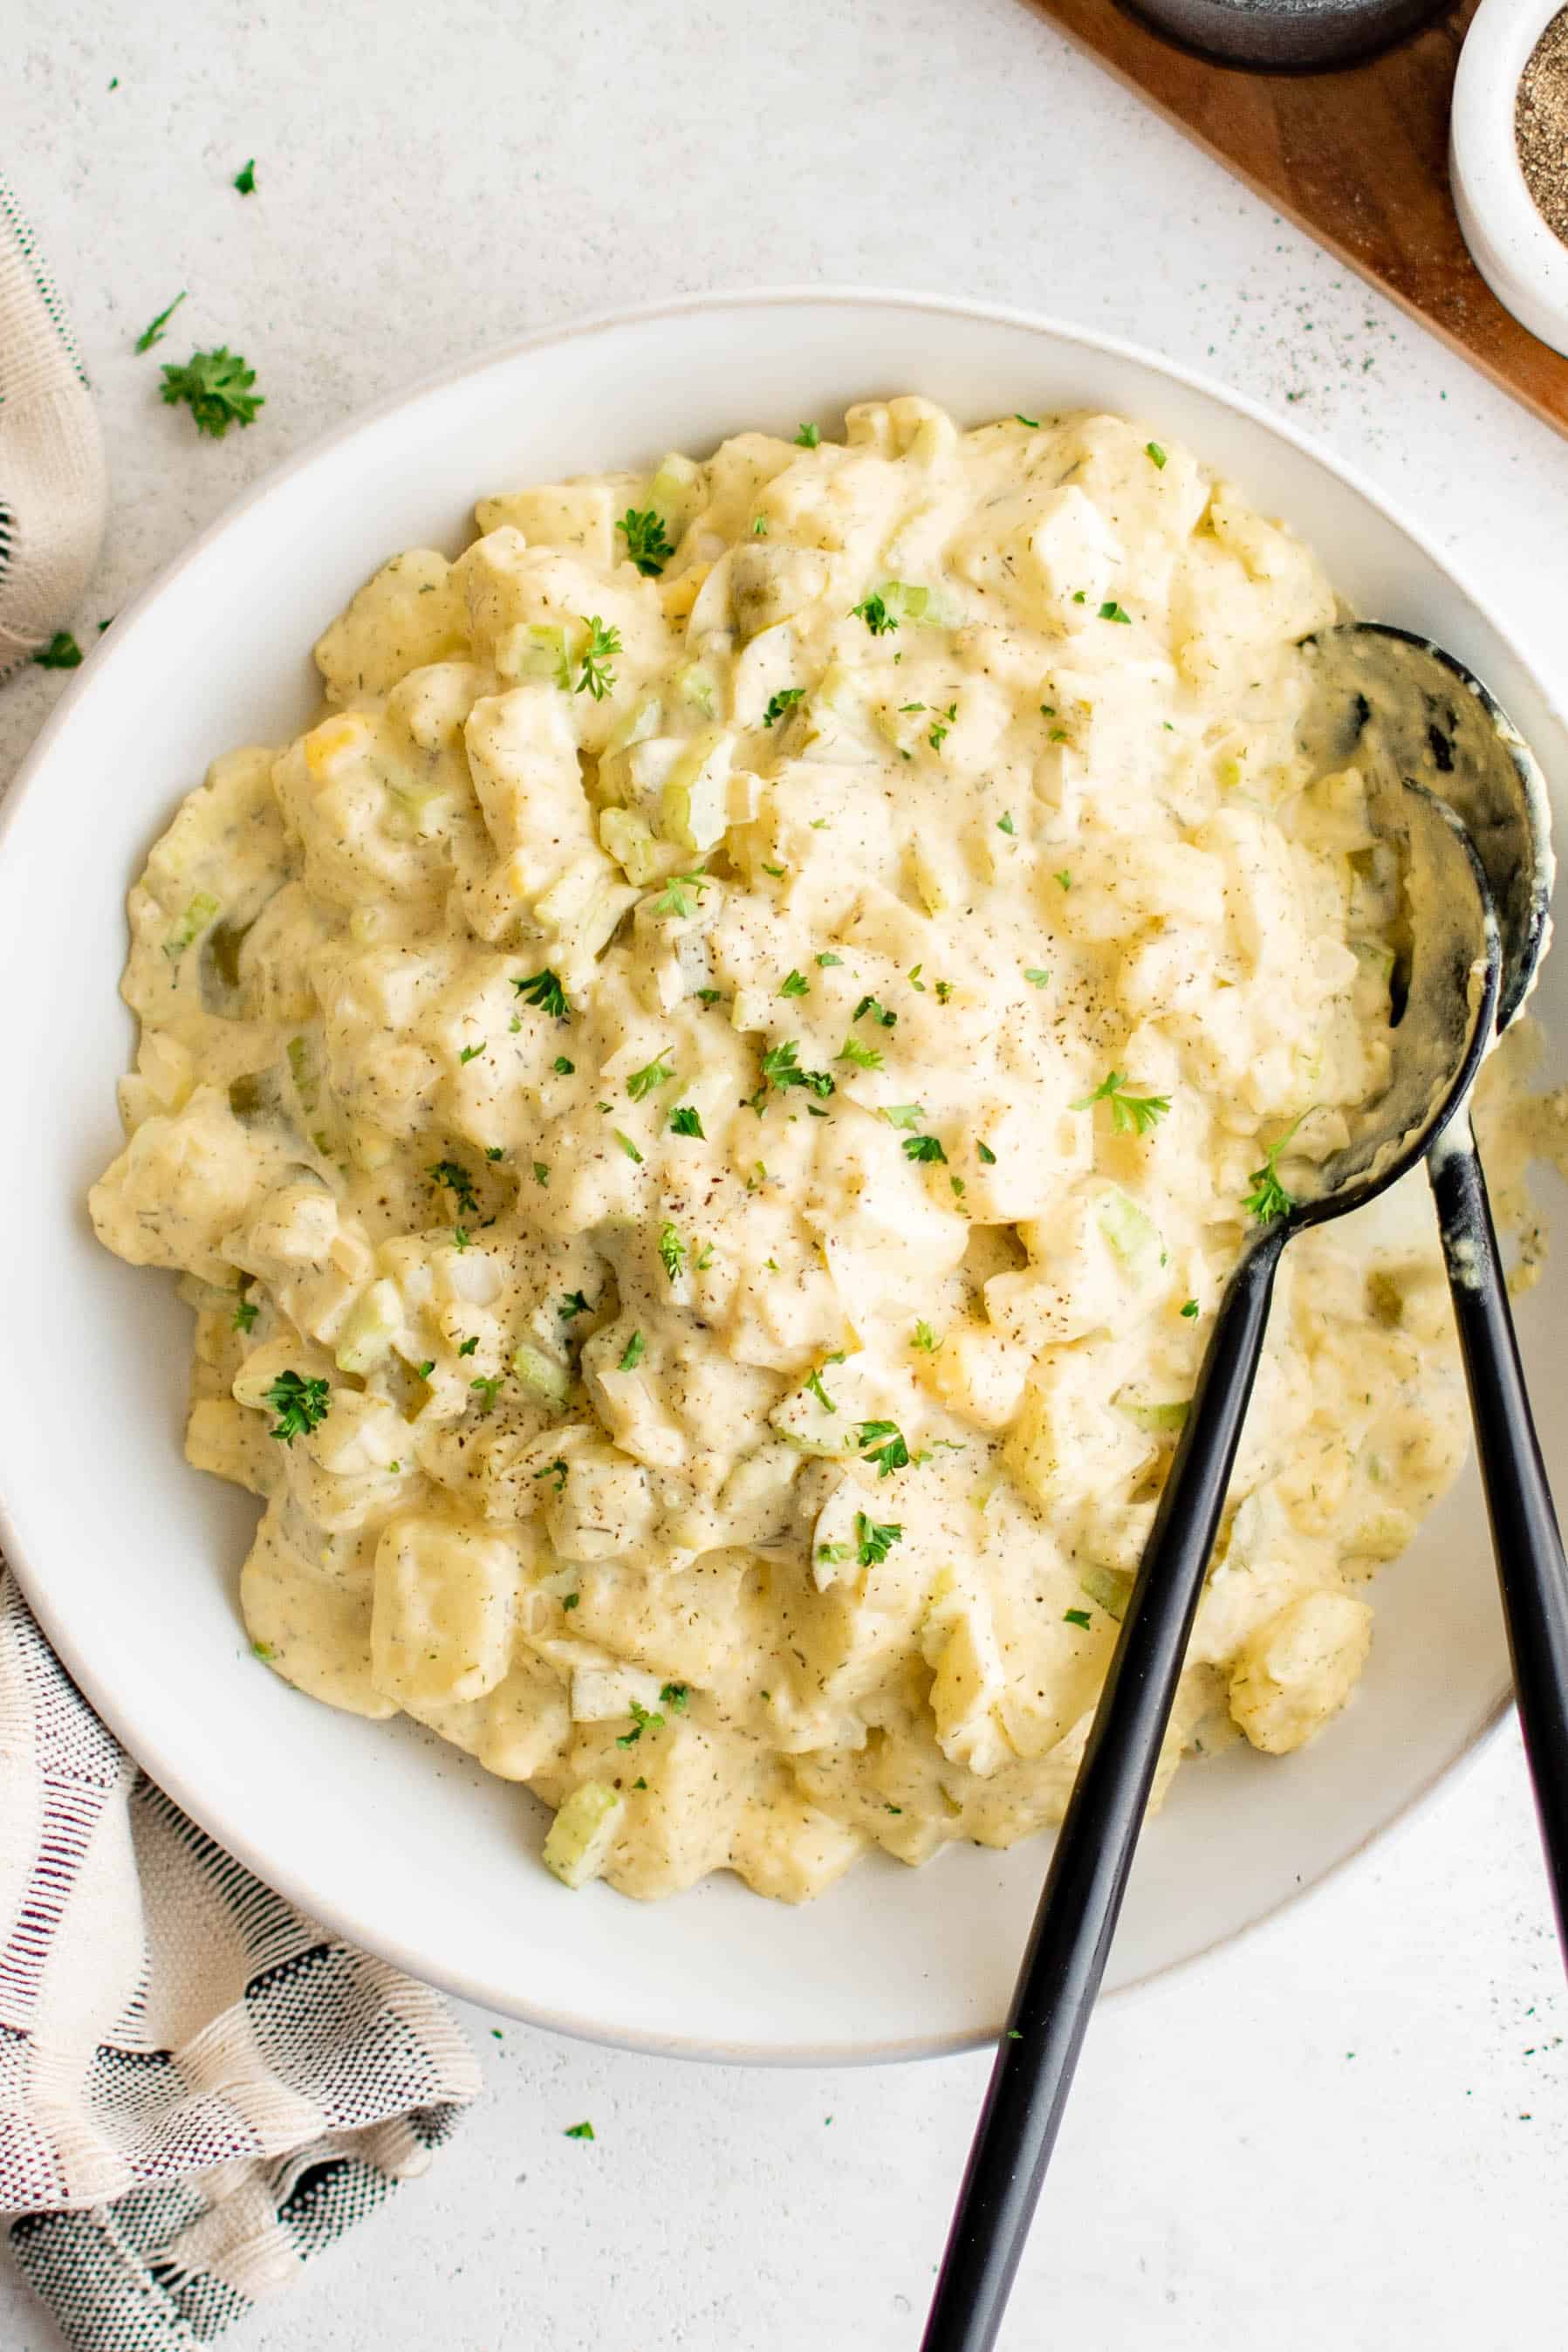 A large white bowl filled with creamy potato salad and garnished with chopped parsley.